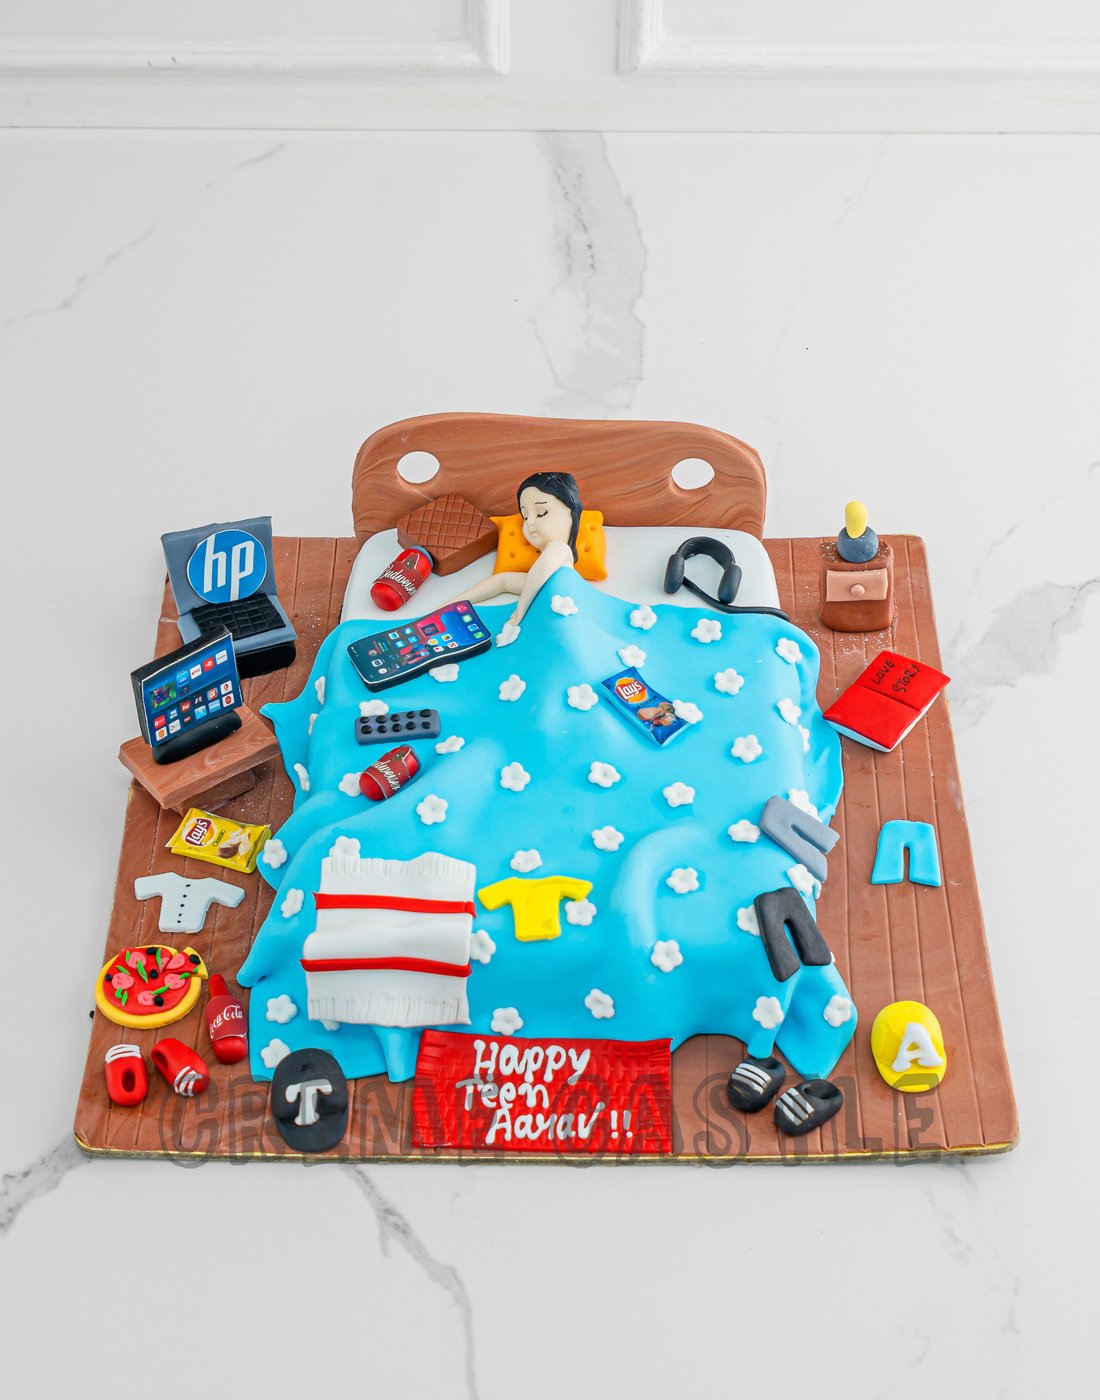 Theme cake for a Netflix lover ❤️🥰✨🎂 #happyclientshappyme  @royalbakingstudio_official ❤️ Get your customized cake designed from… |  Instagram